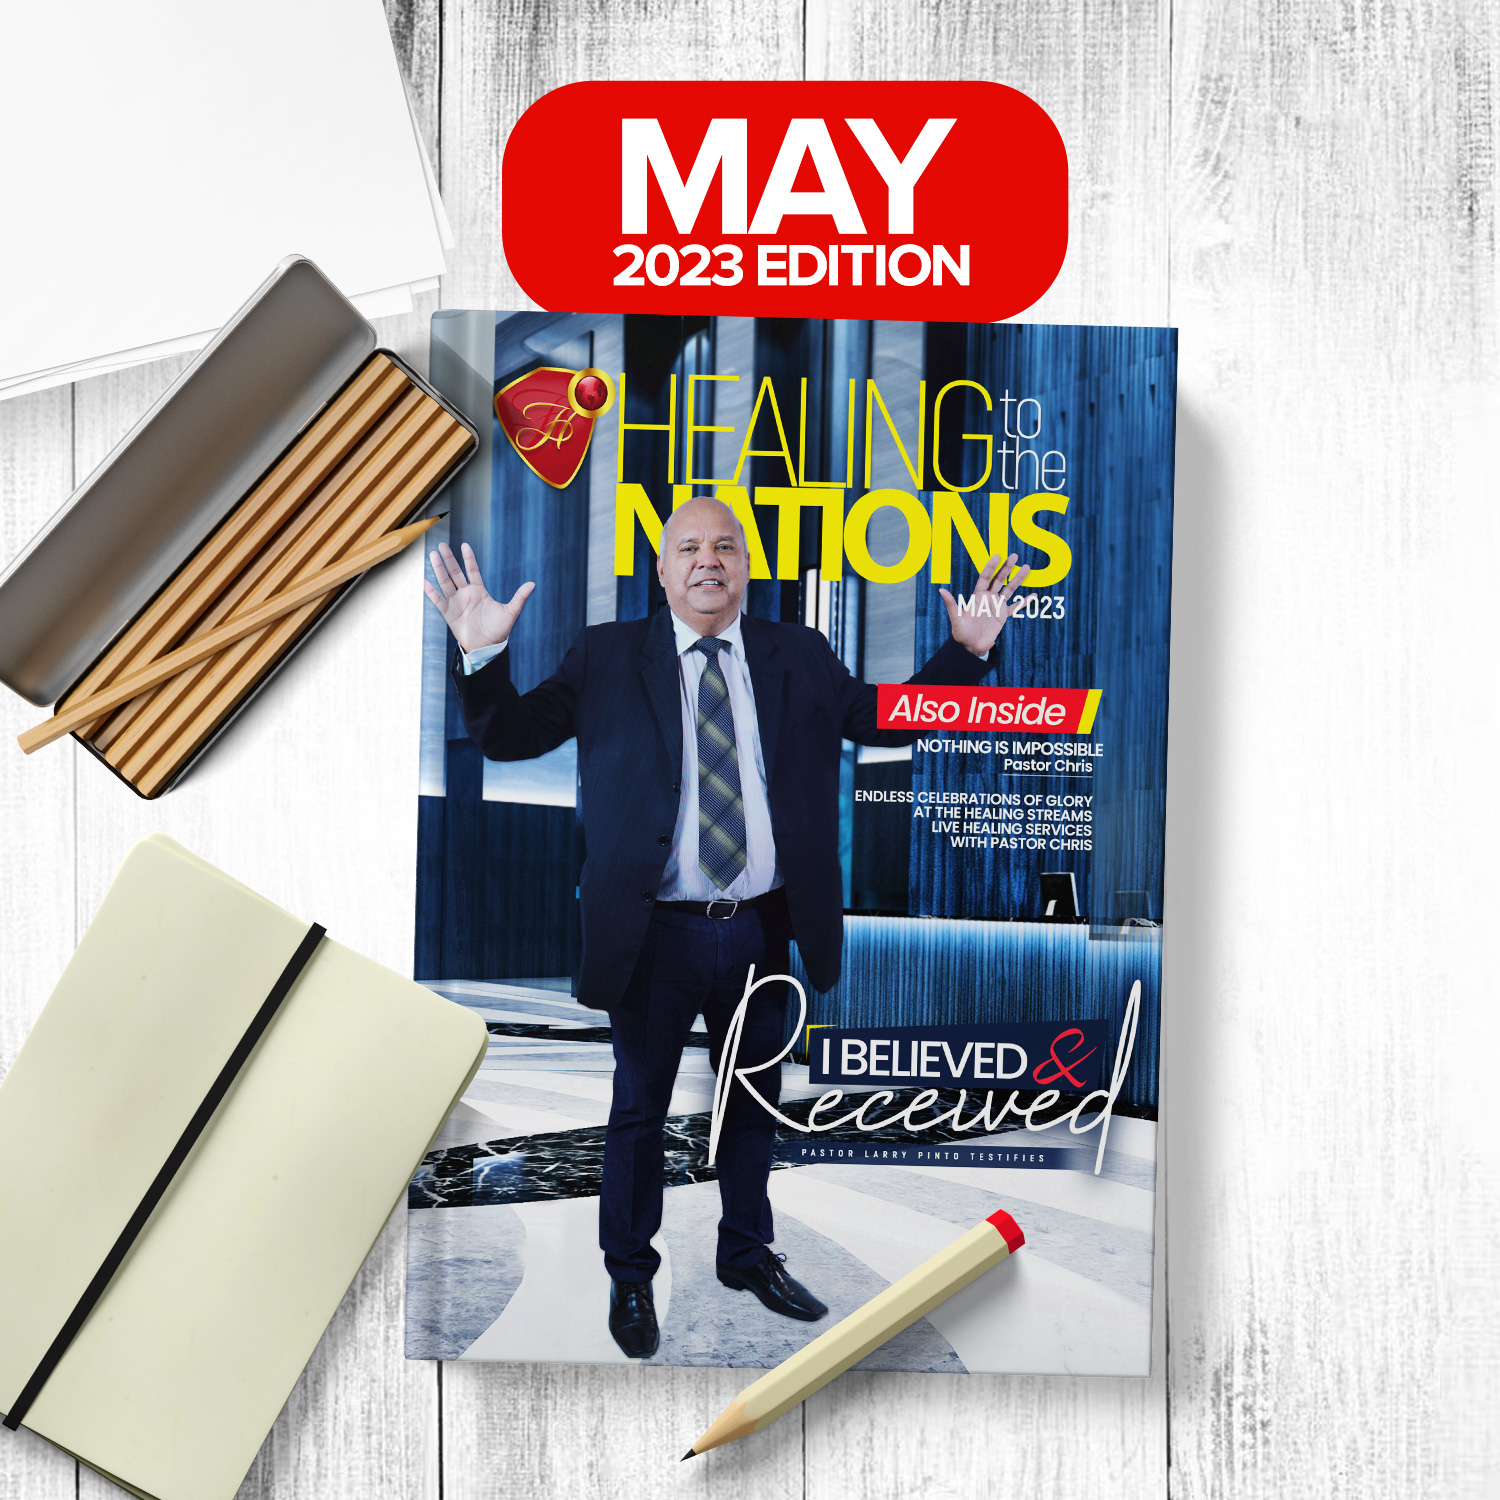 HEALING TO THE NATIONS MAGAZINE - MAY 2023